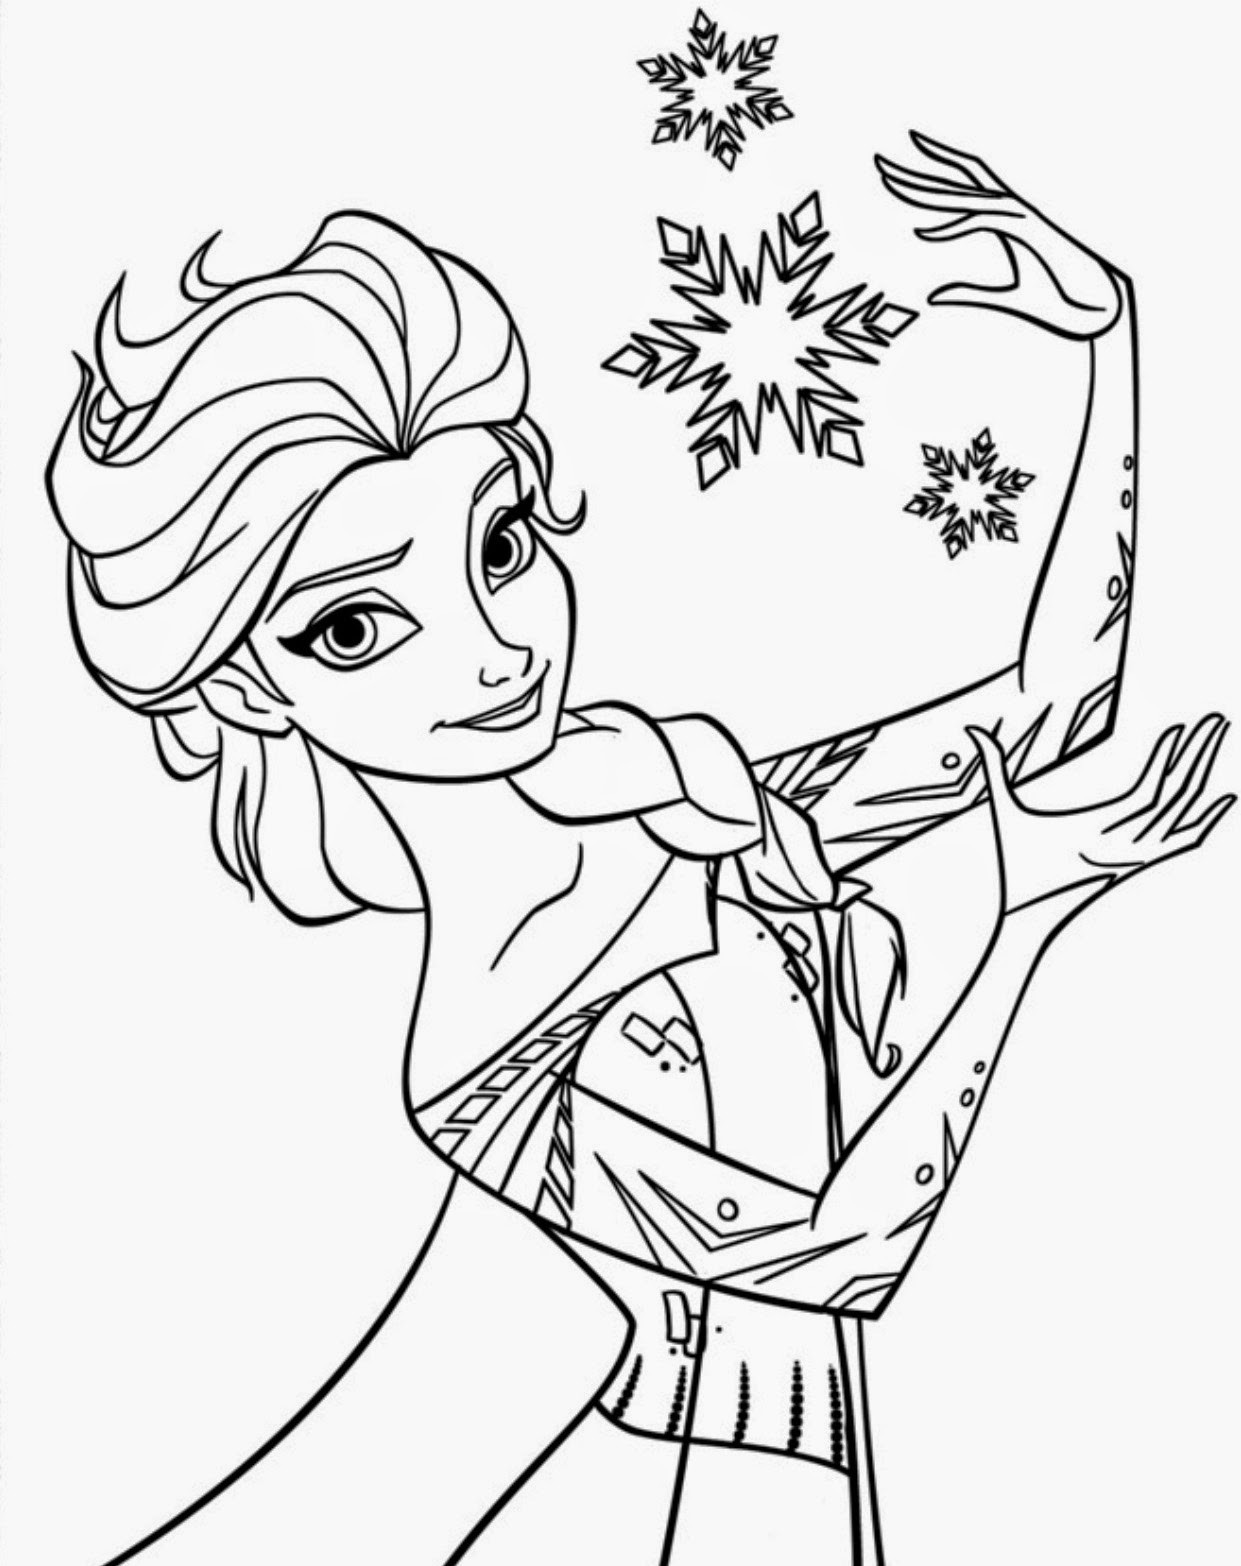 Coloring Pages Printable Disney
 15 Beautiful Disney Frozen Coloring Pages Free Instant